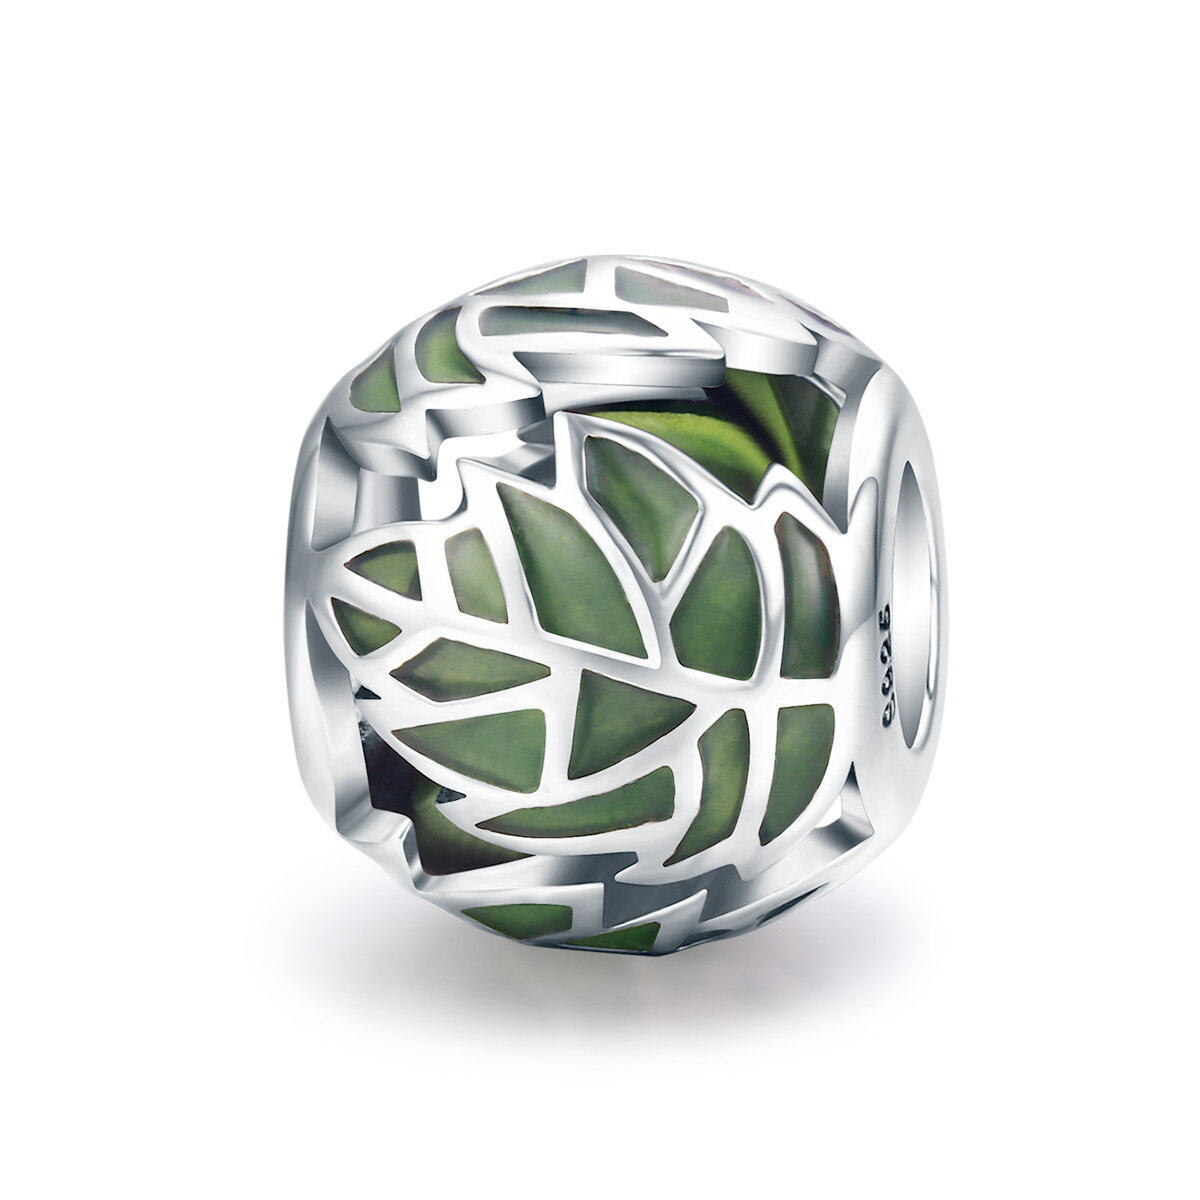 GemKing SCC524 Green Chic Leaves S925 Sterling Silver Charm